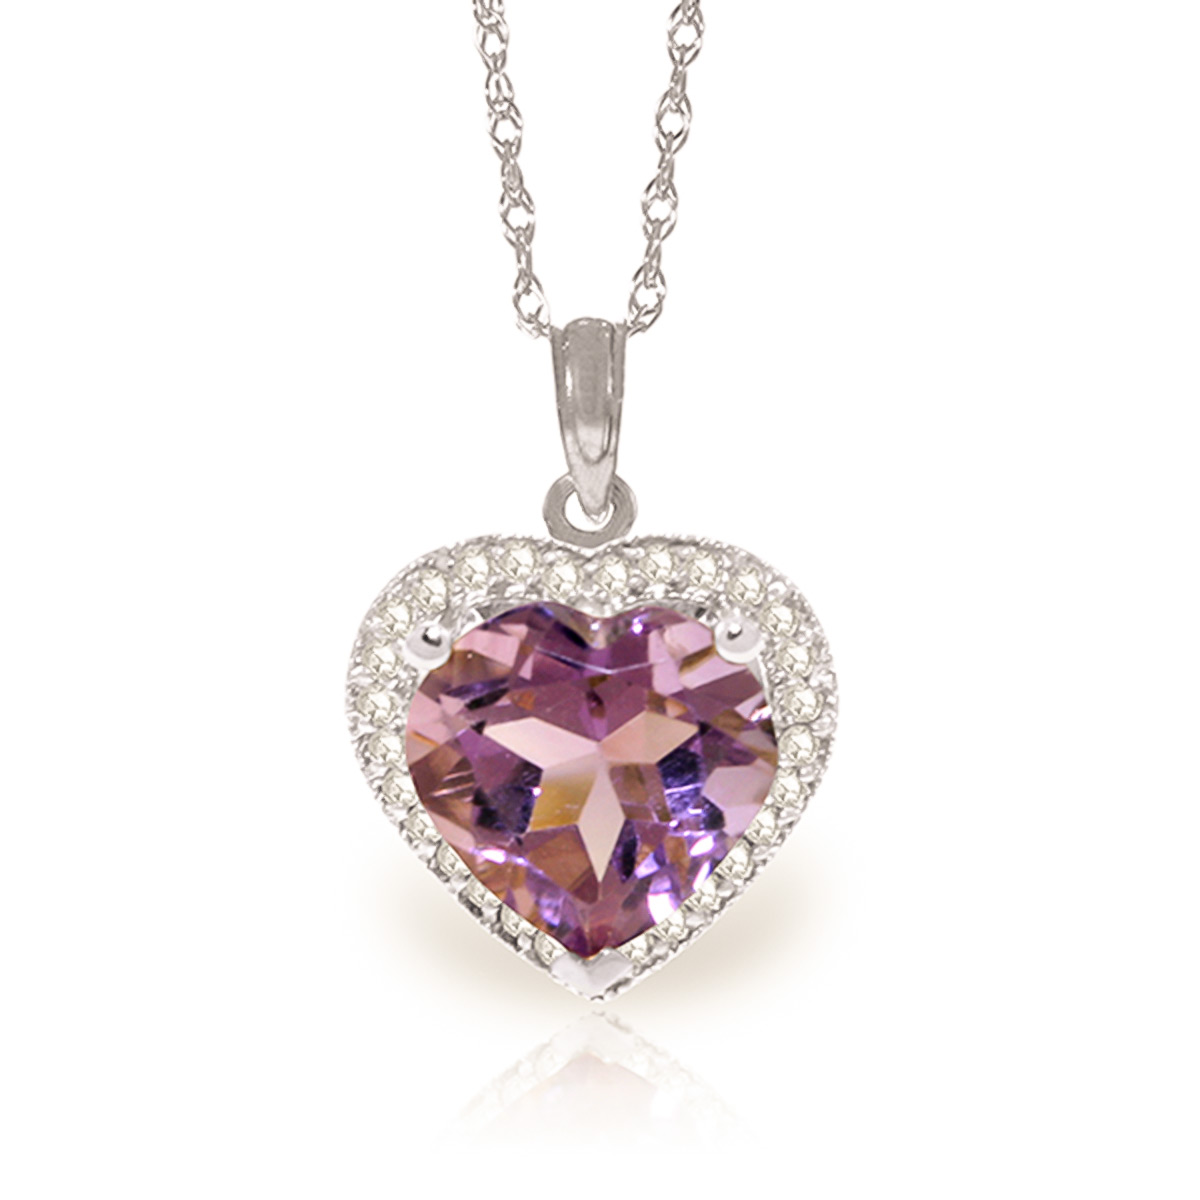 Amethyst Halo Pendant Necklace 3.24 ctw in 9ct White Gold